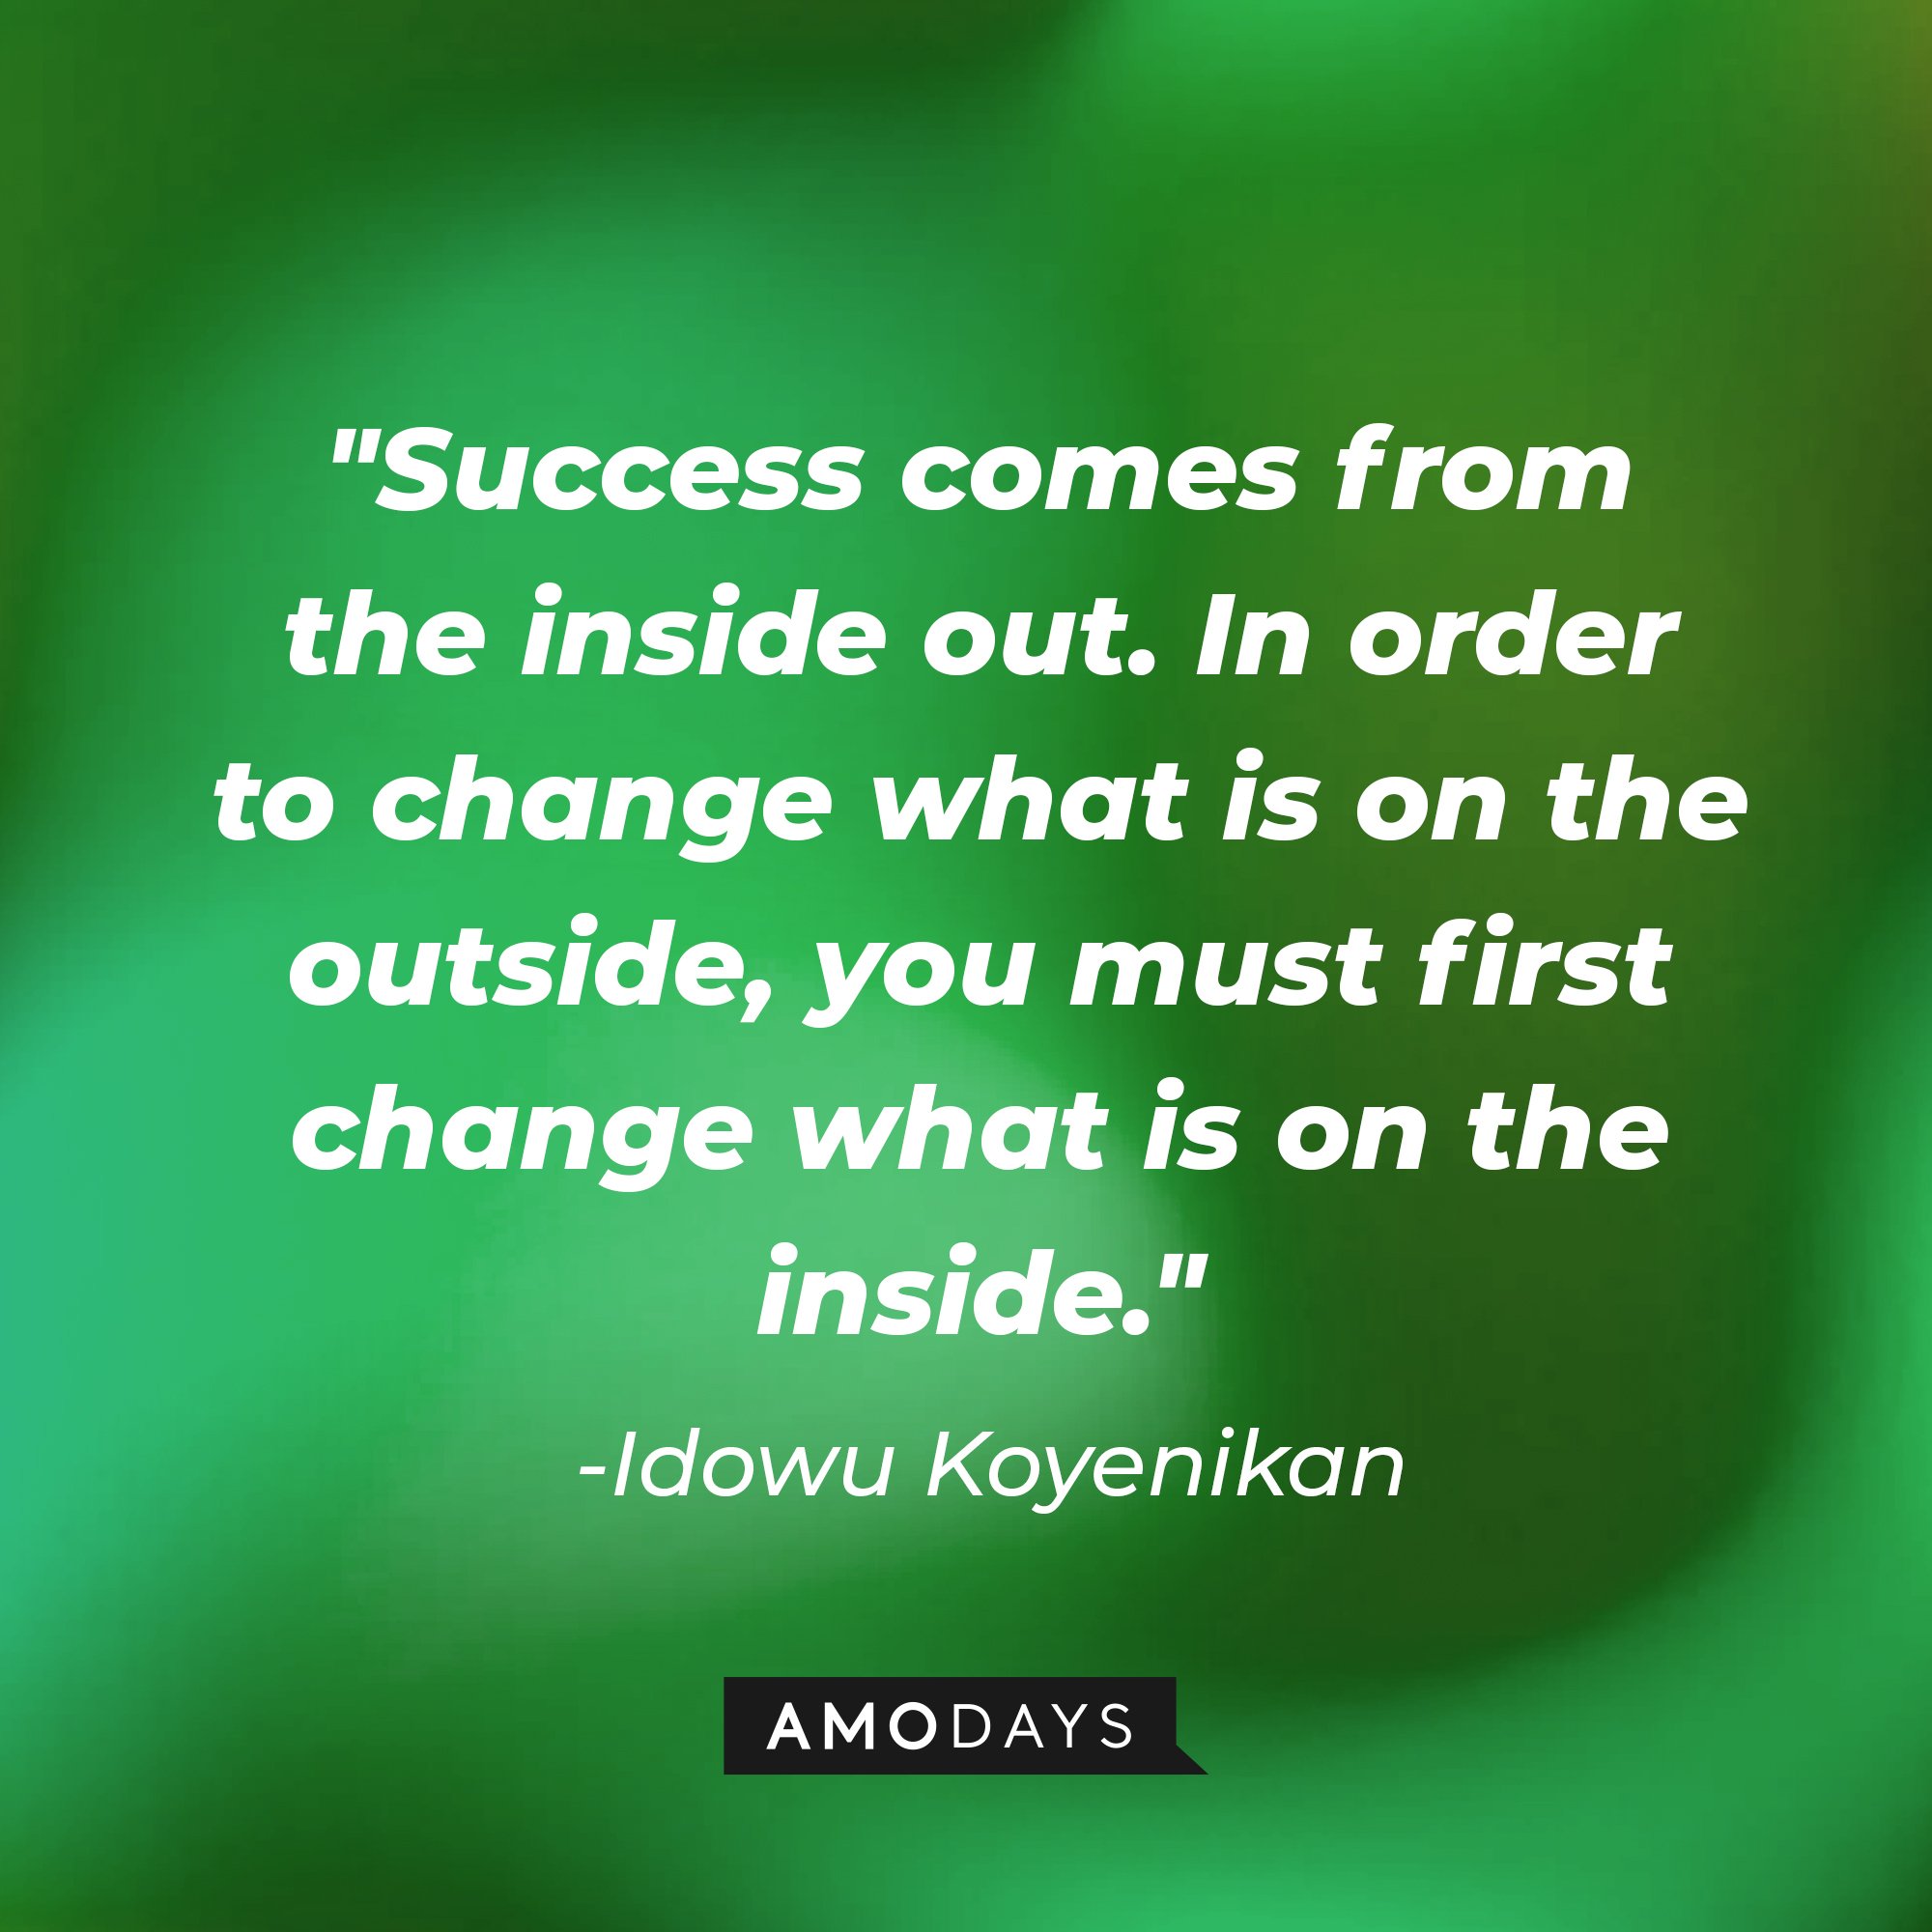 Idowu Koyenikan's quote: "Success comes from the inside out. In order to change what is on the outside, you must first change what is on the inside." | Image: AmoDays